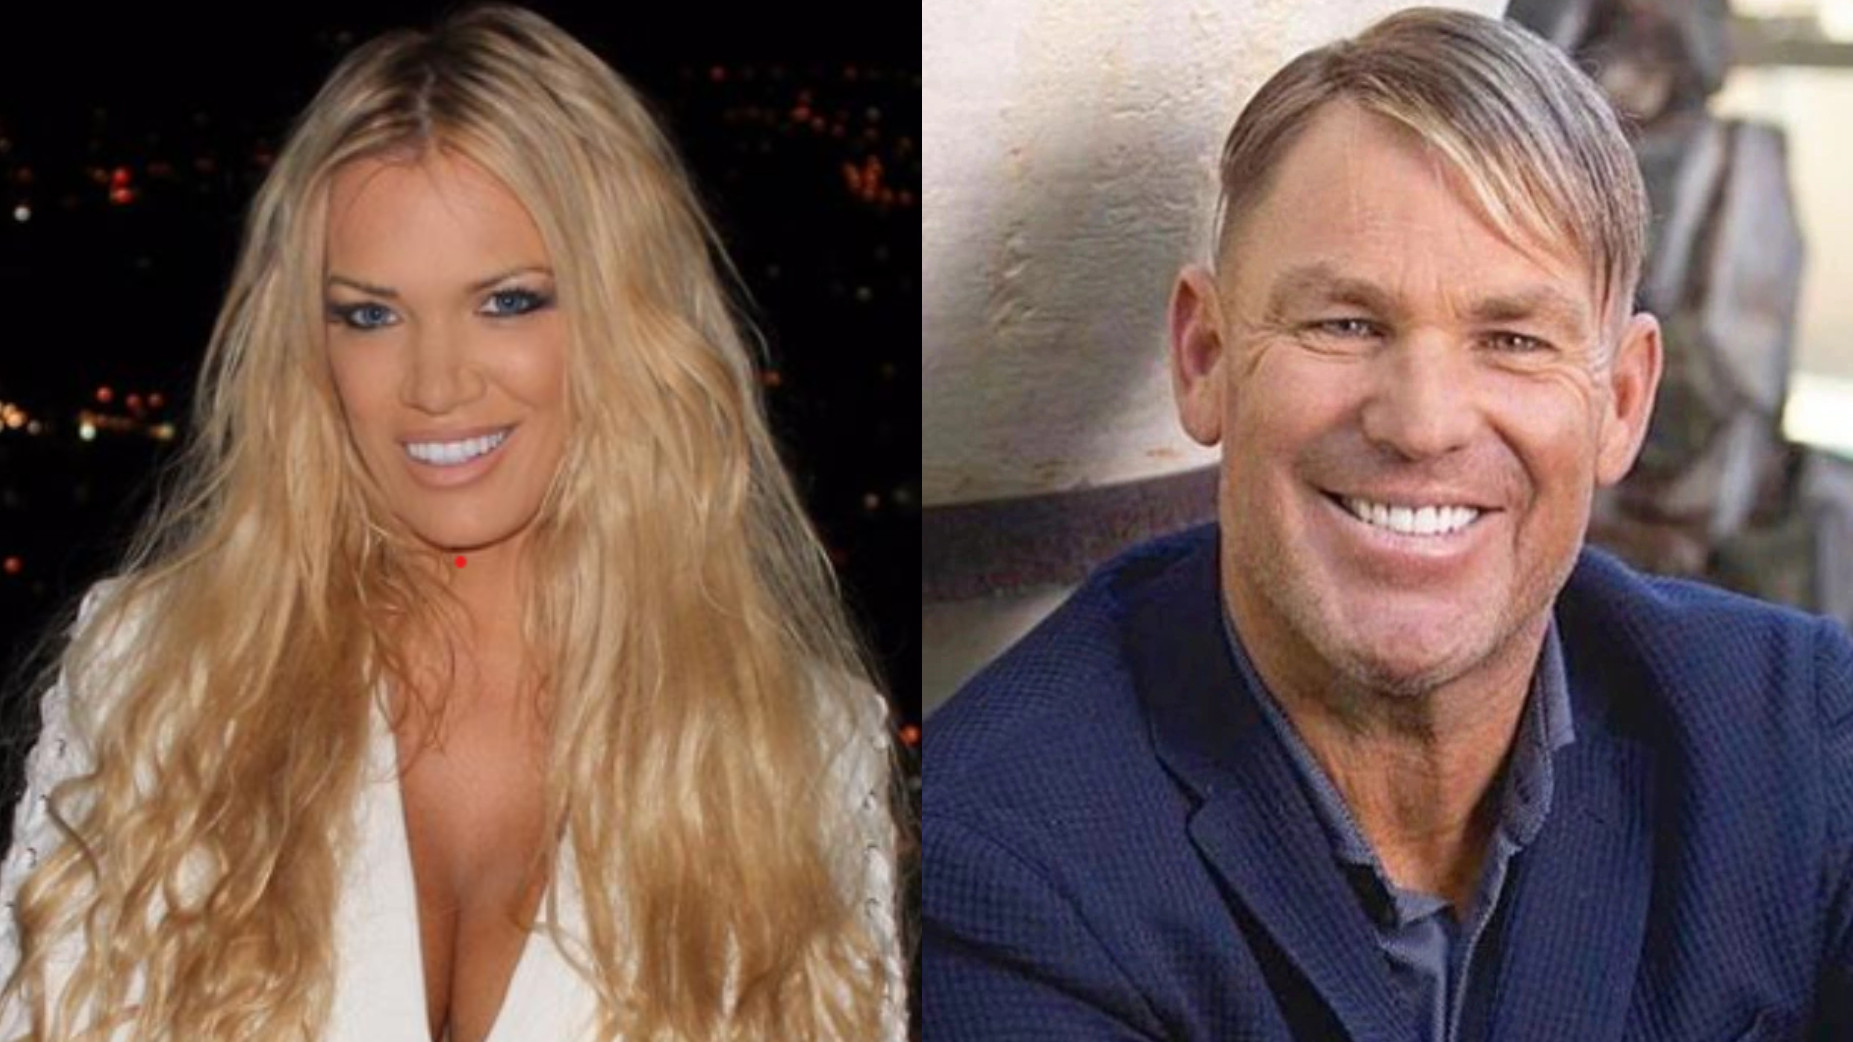 'World's hottest grandma' Gina Stewart claims dating Shane Warne before his untimely demise